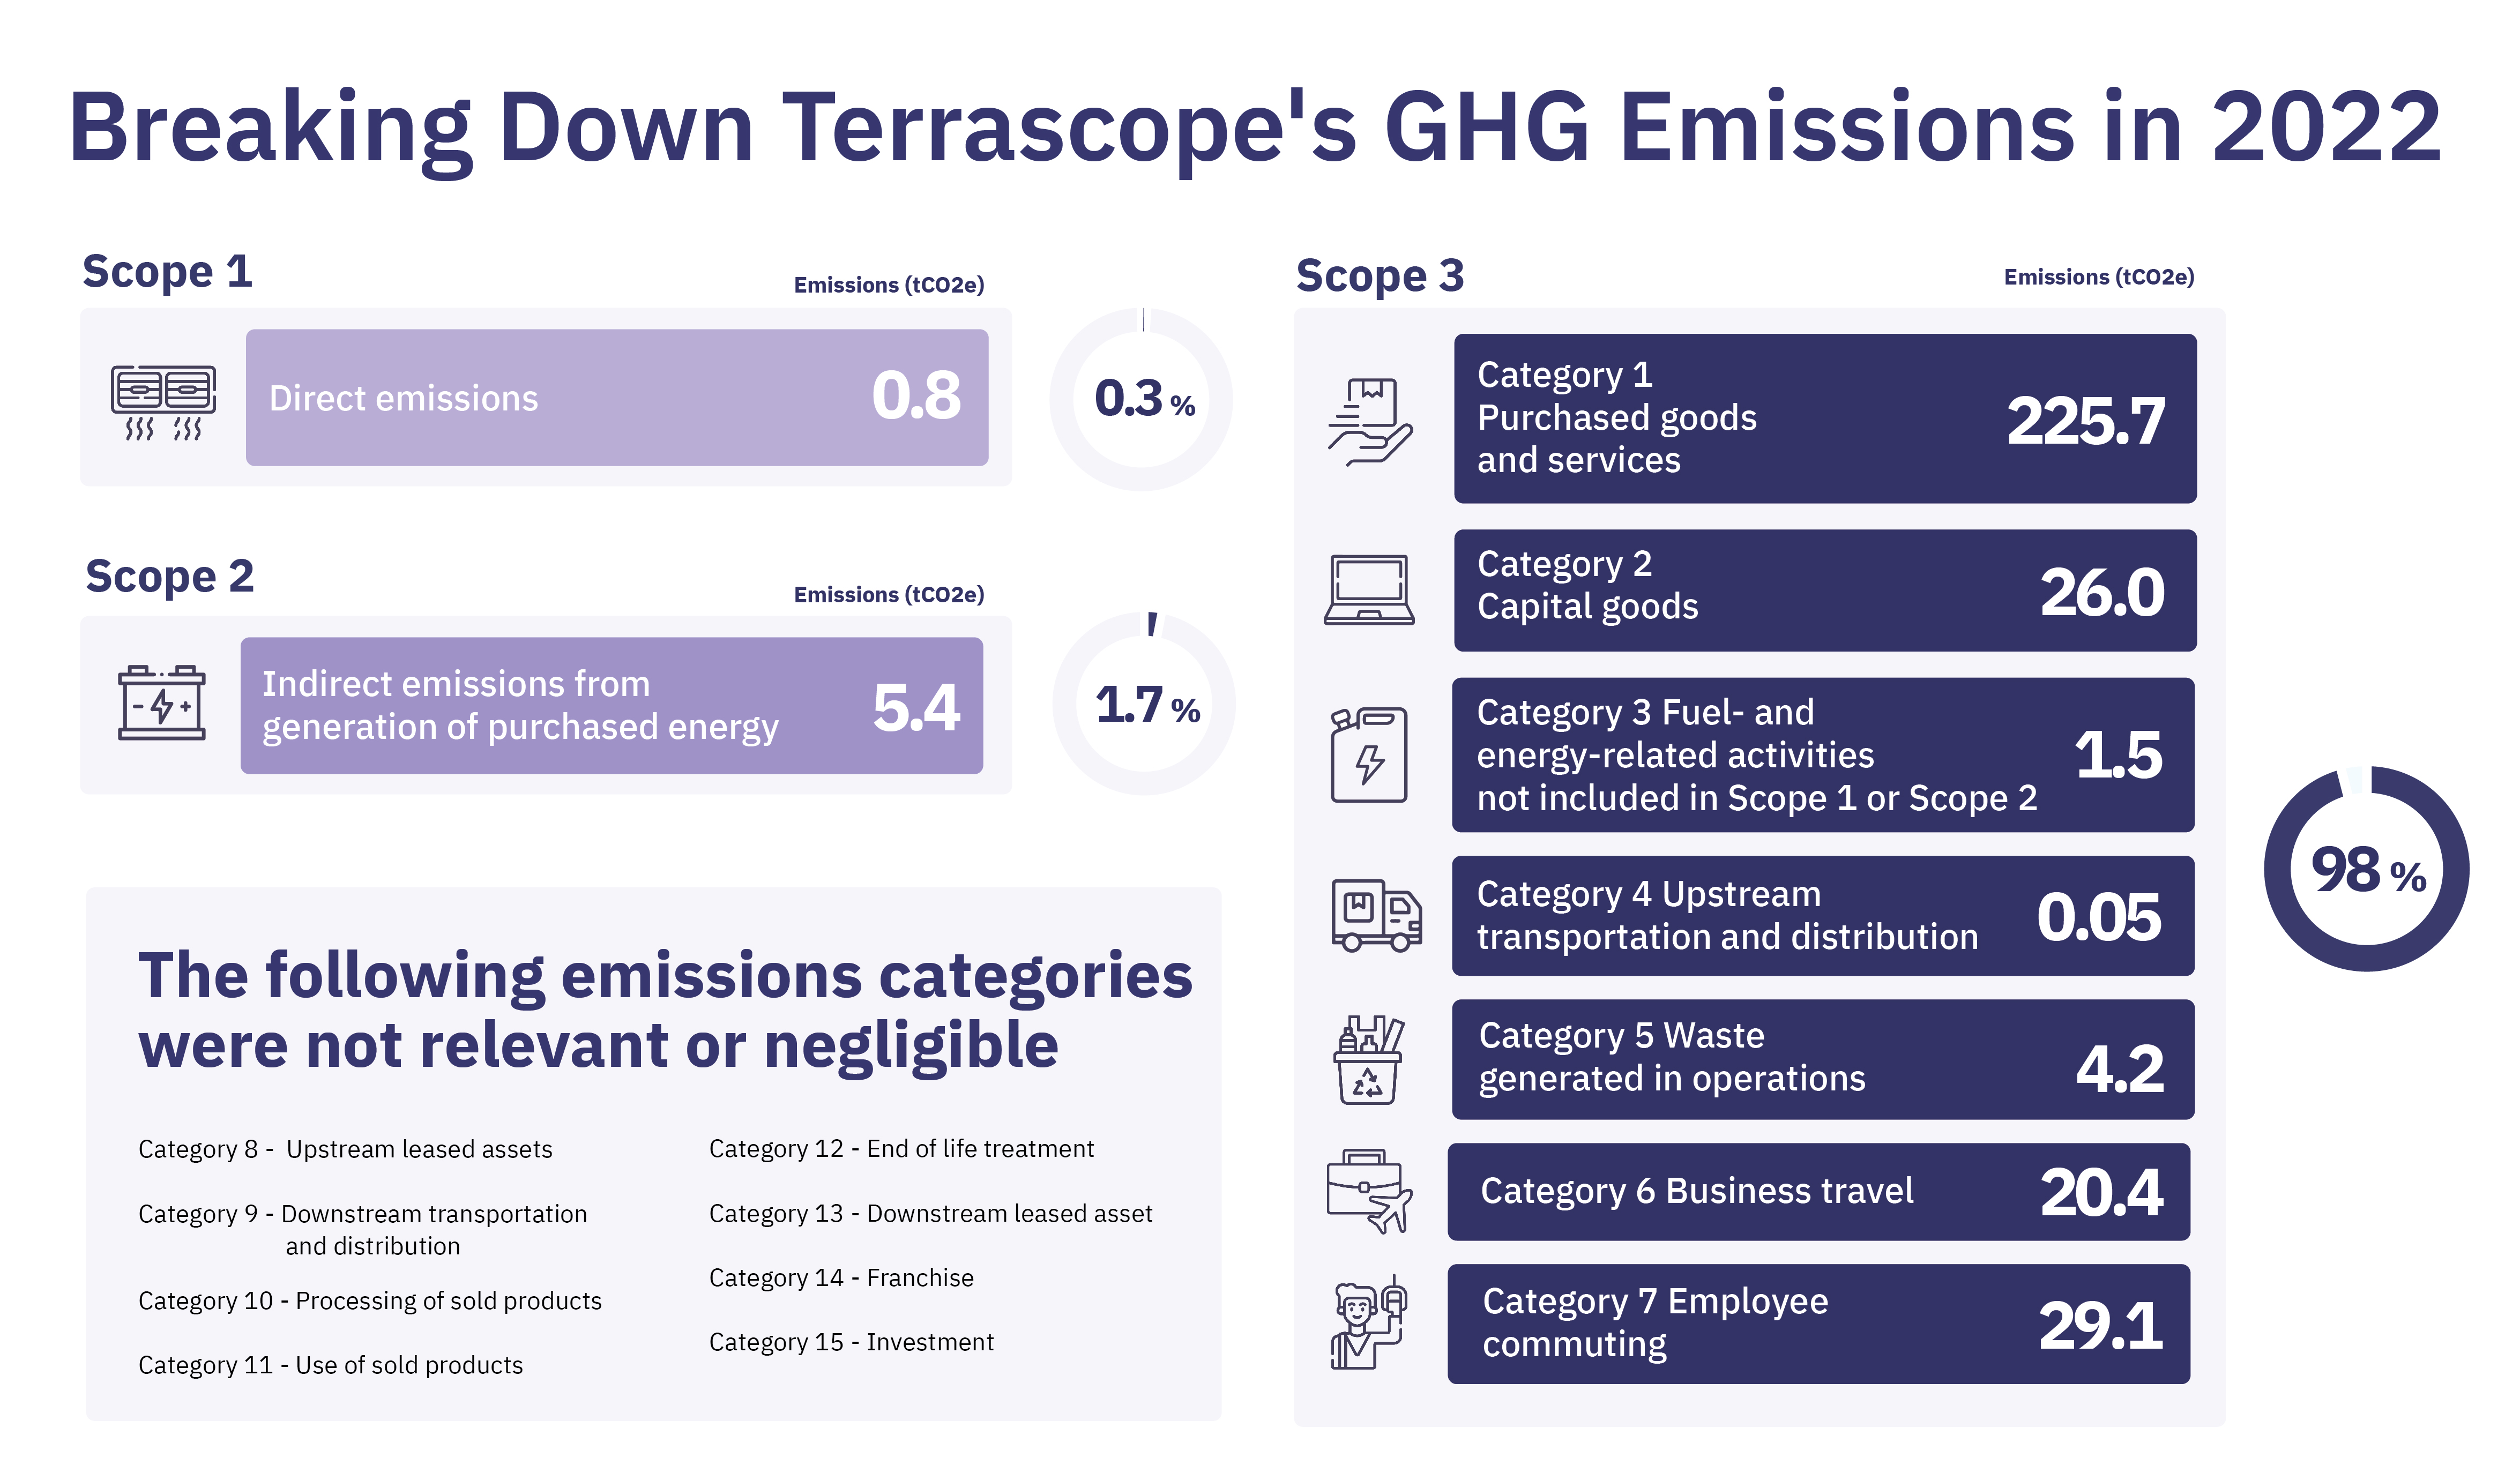 breaking-down-terrascope-ghg-emission-scope-with-negligible-emission